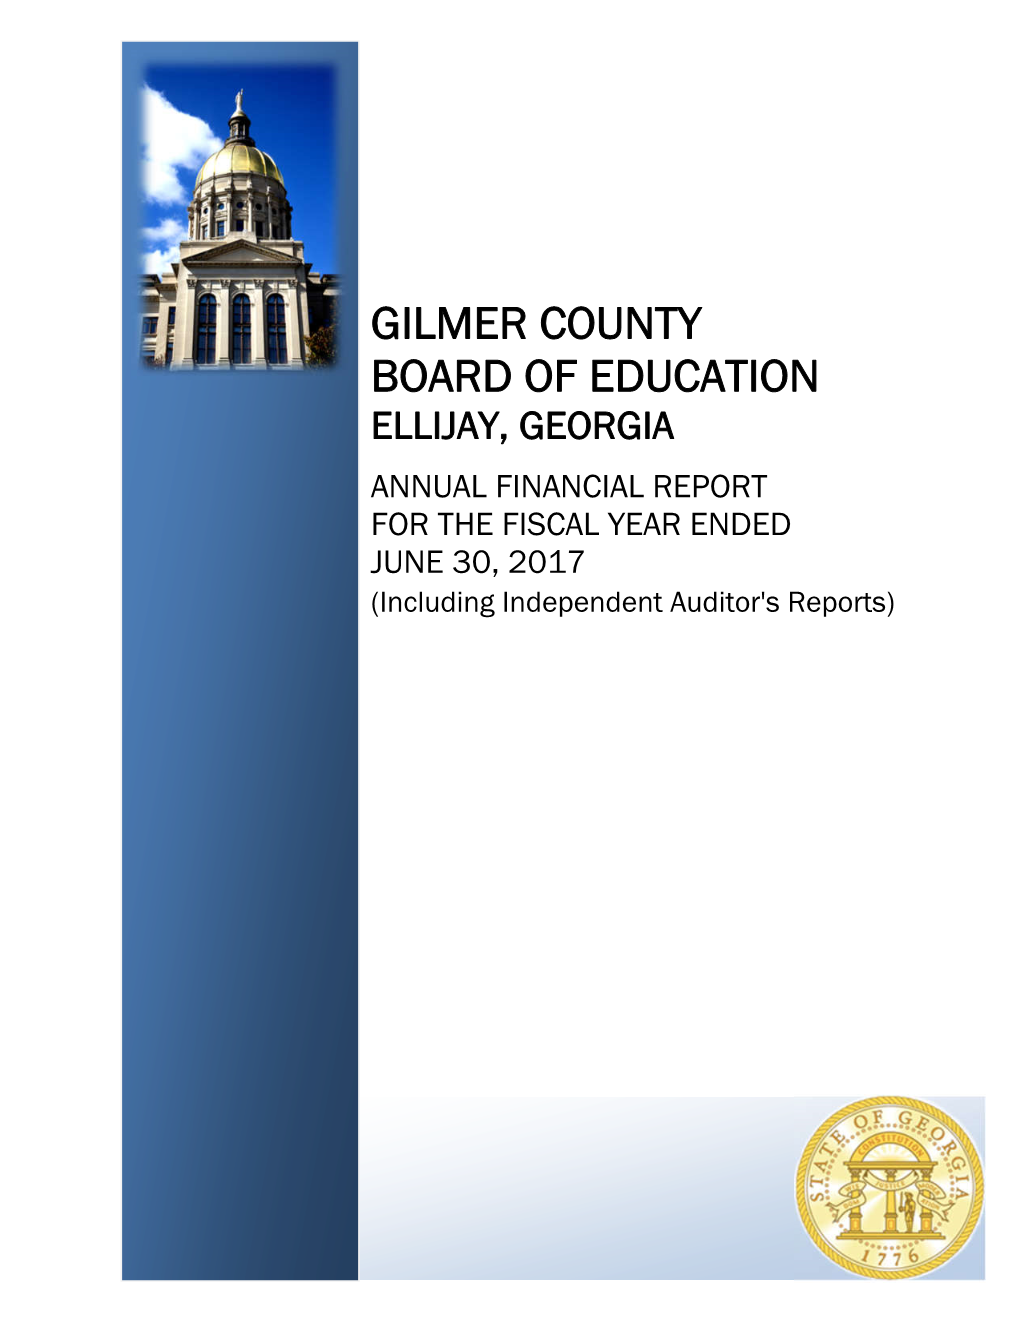 GILMER COUNTY BOARD of EDUCATION ELLIJAY, GEORGIA ANNUAL FINANCIAL REPORT for the FISCAL YEAR ENDED JUNE 30, 2017 (Including Independent Auditor's Reports)